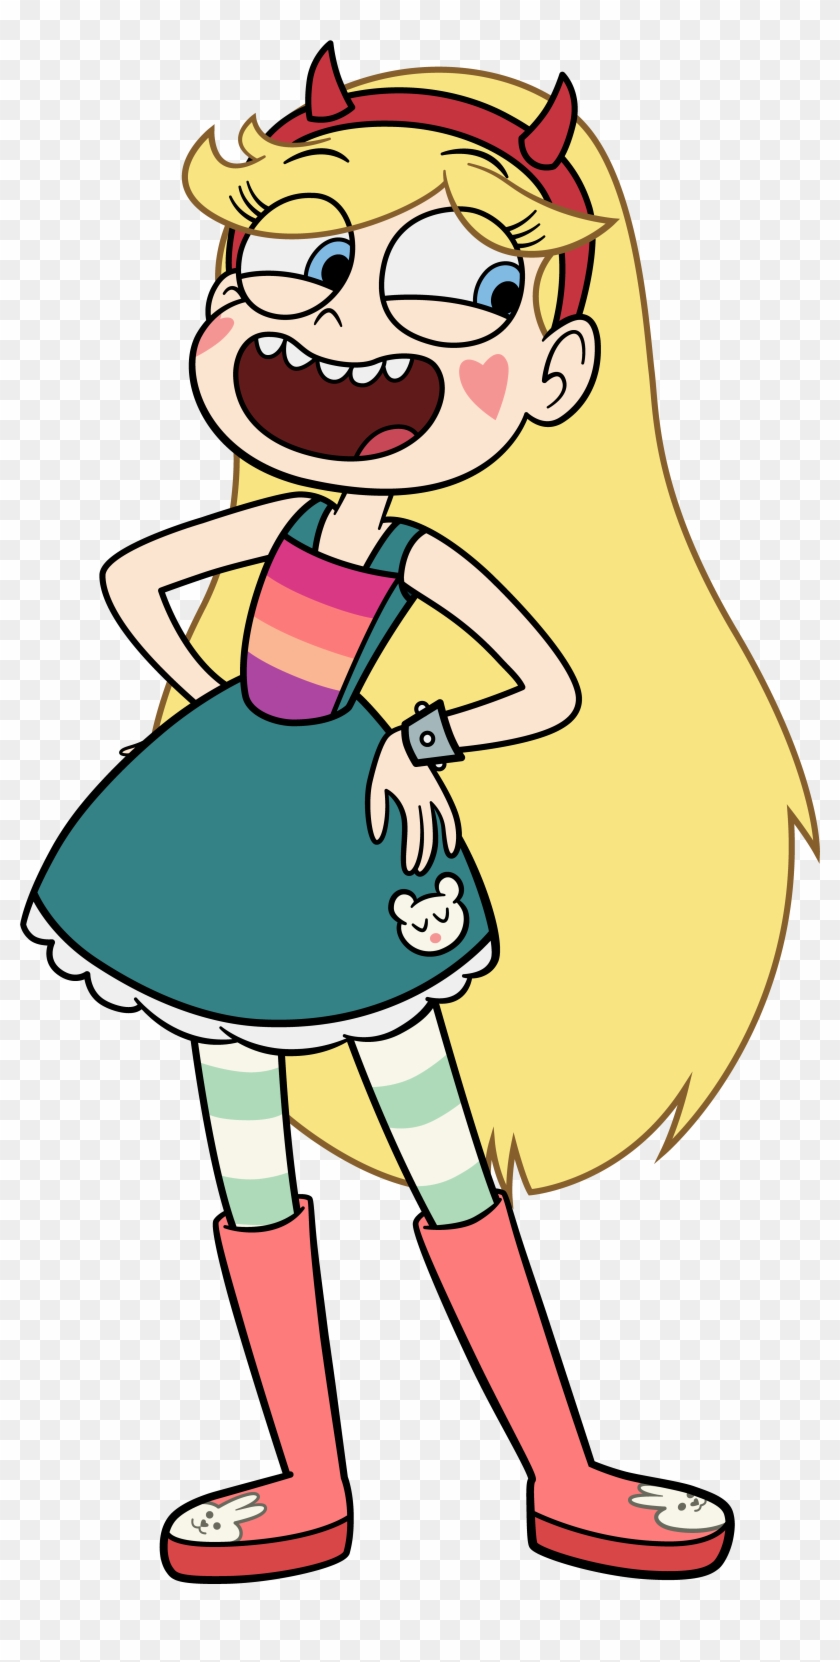 Star Butterfly 56 8 Star Butterfly By Star Butterfly - Star Vs The Forces Of Evil Star Dress #209648